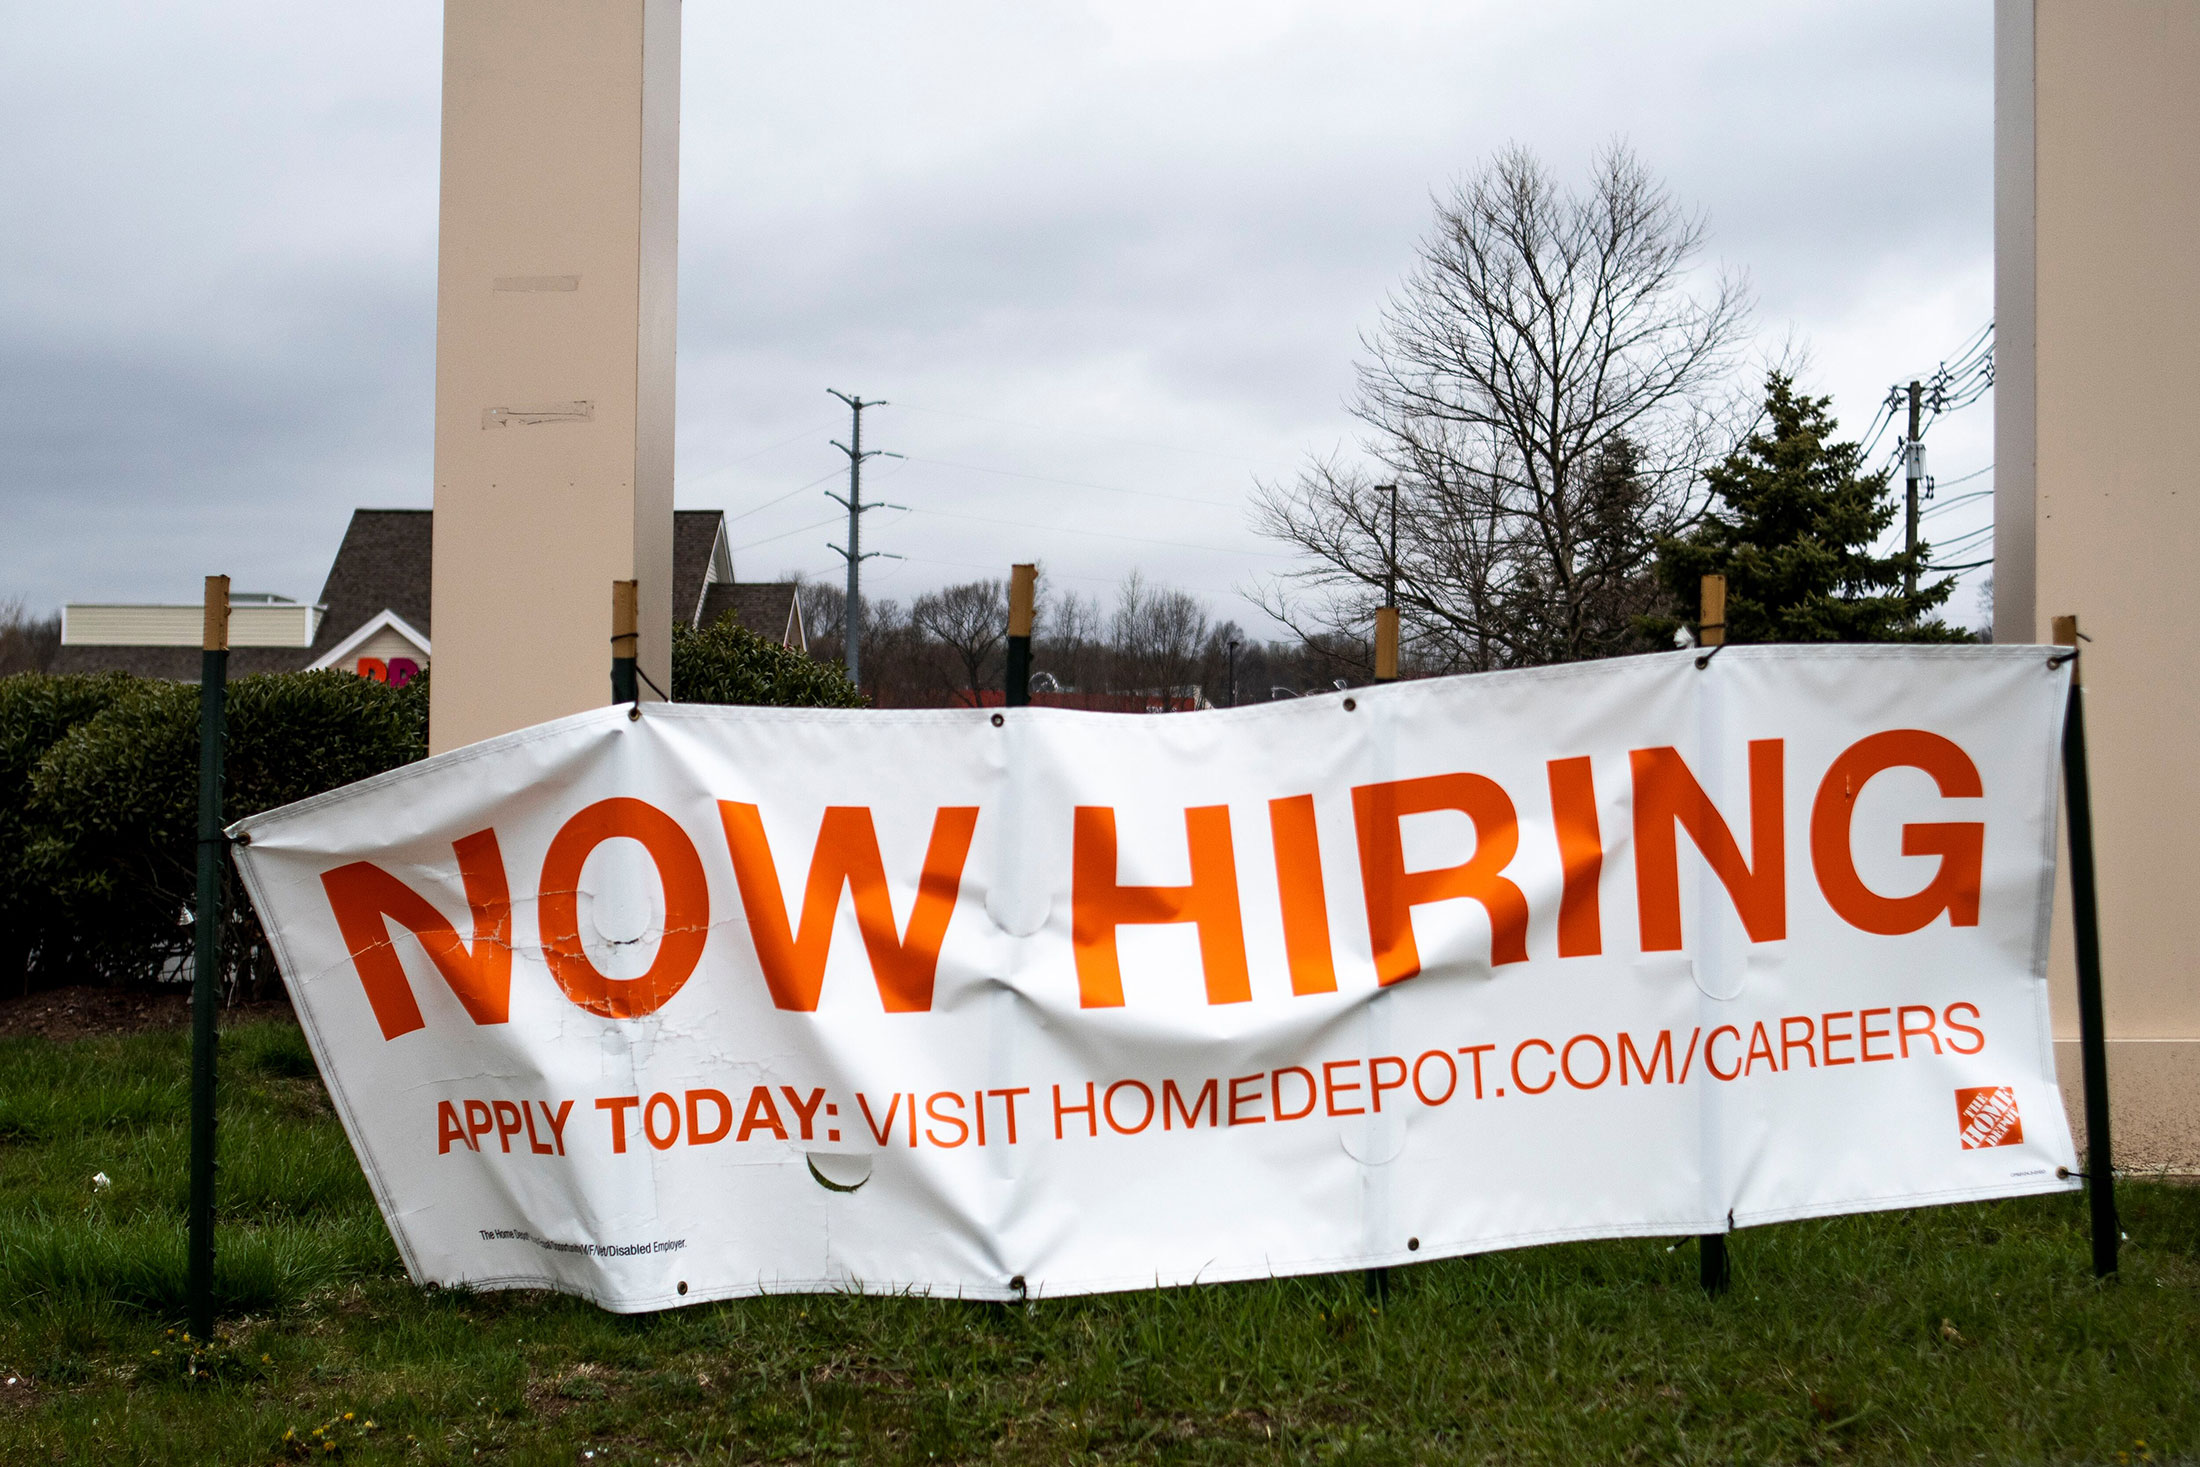 Home Depot in Wallingford put out a sign in December to lure new hires.